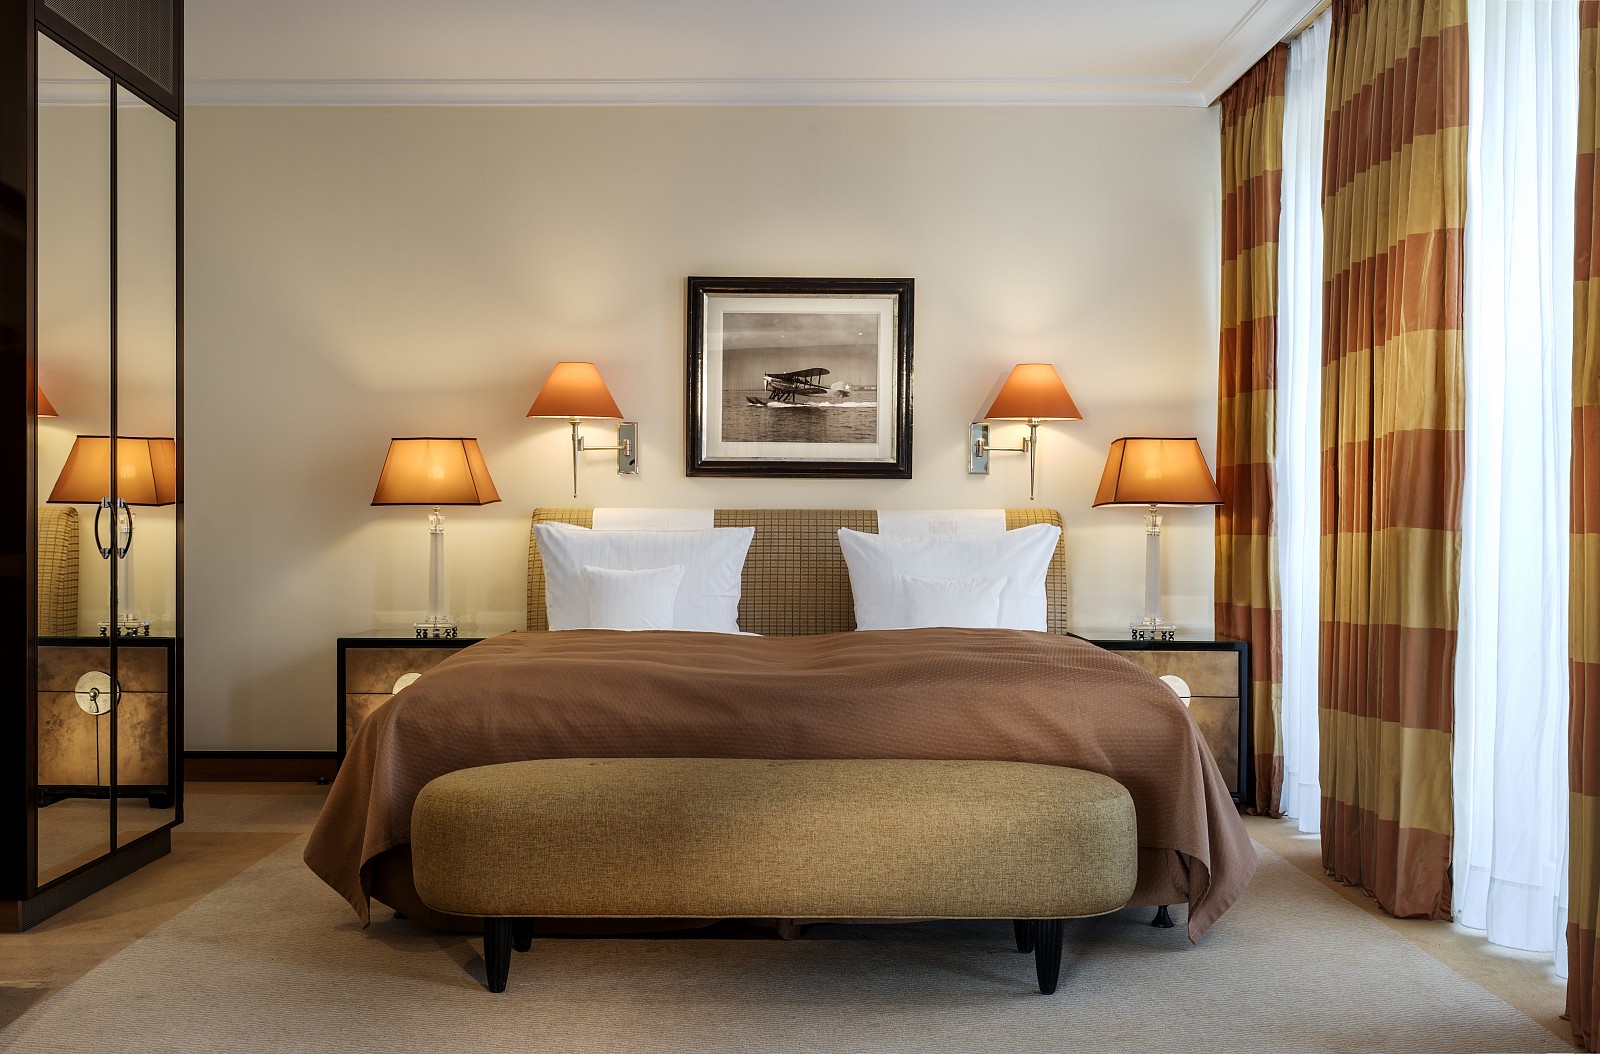 Frontal view of a double bed of a superior suite of the hotel 